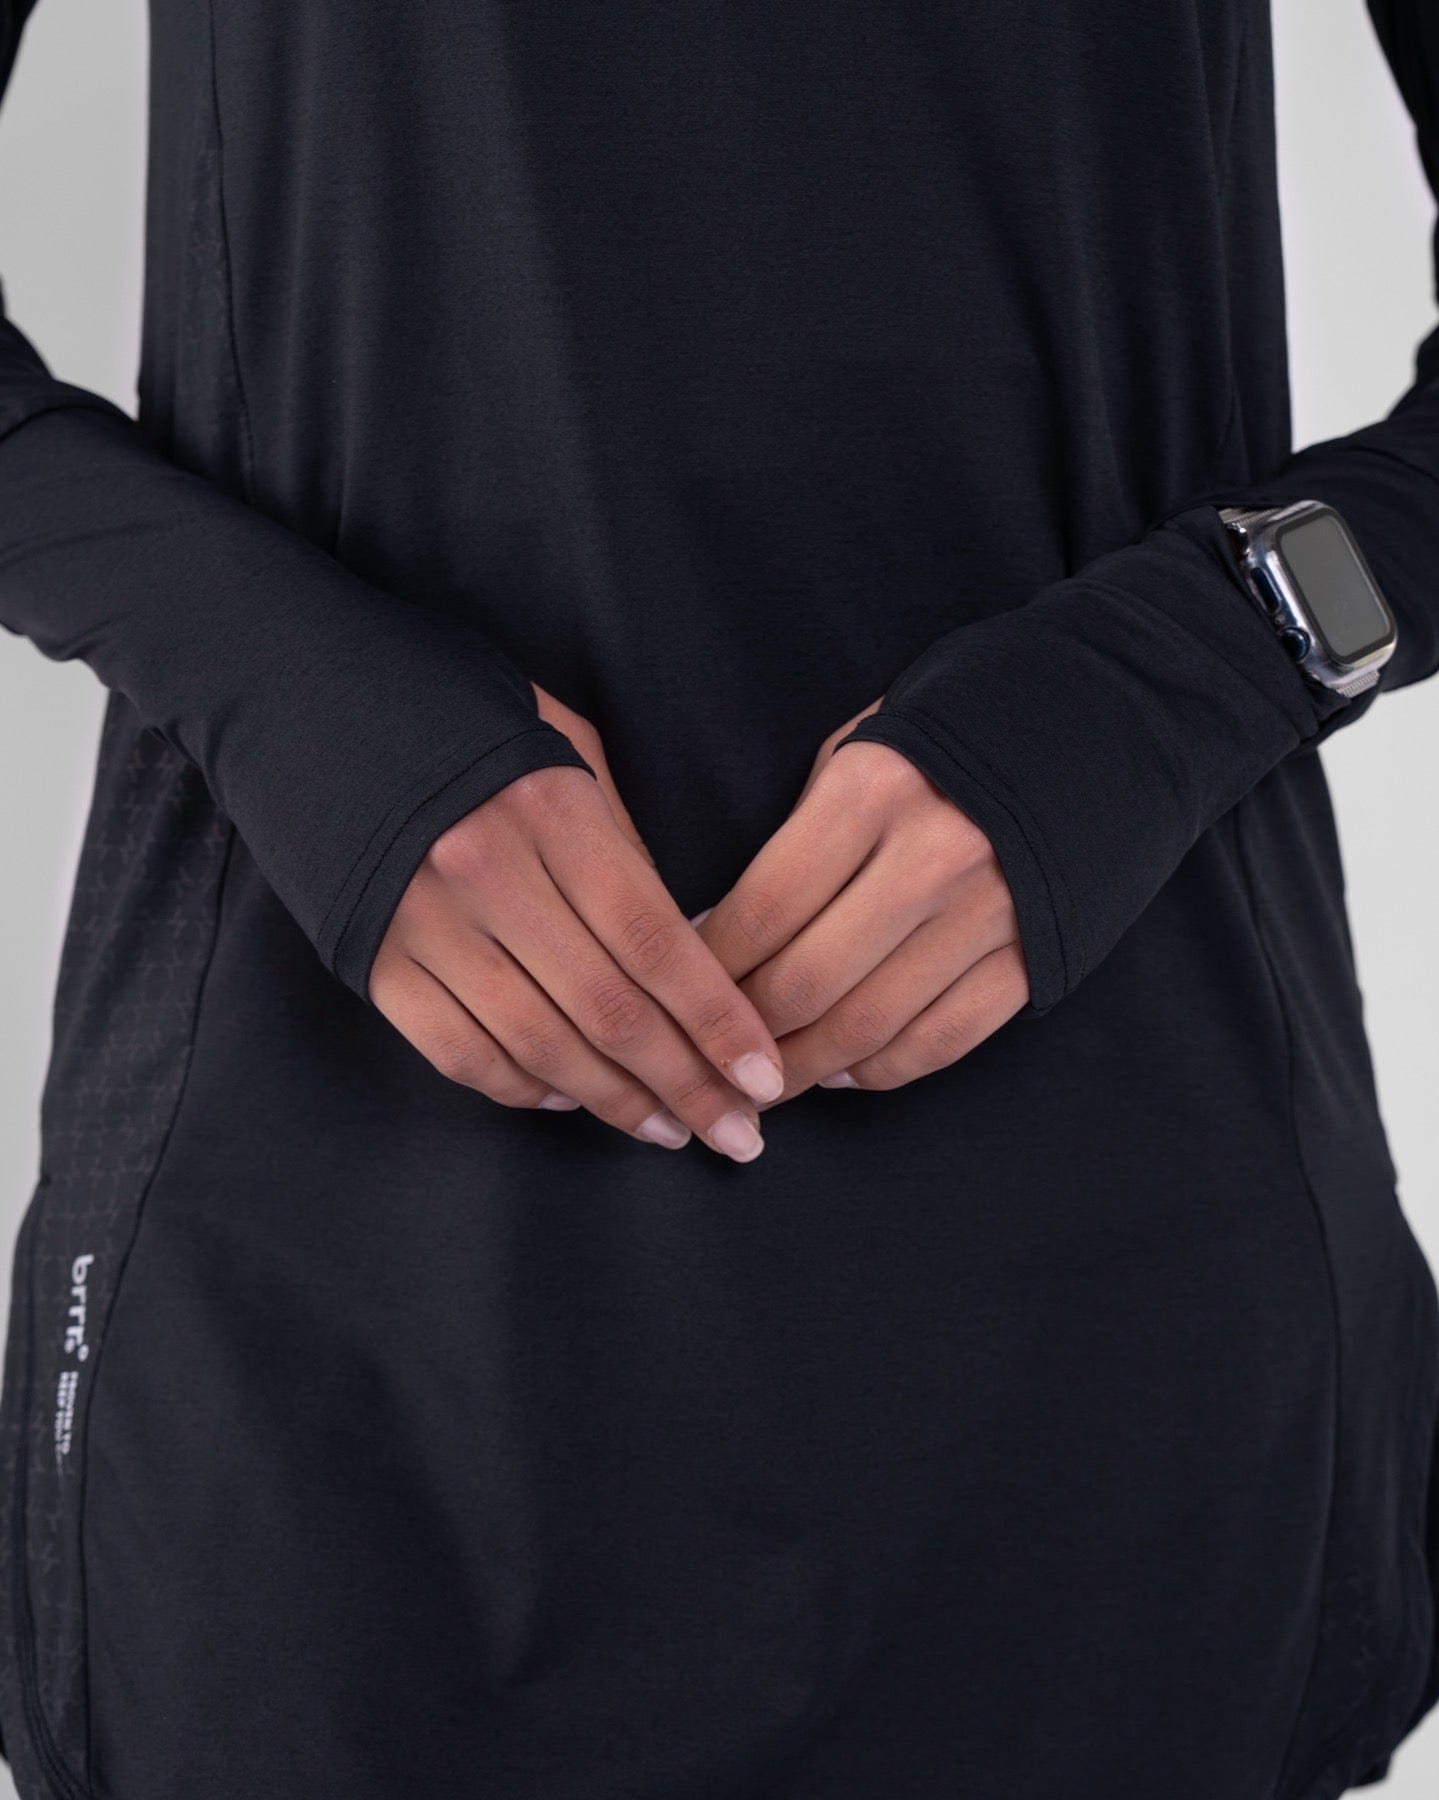 A close-up photo of a model in a black high neck long sleeve shirt ARMA by Qynda with cooling fabric technology, holding their hands together at the lower, showing a smartwatch on their left wrist.